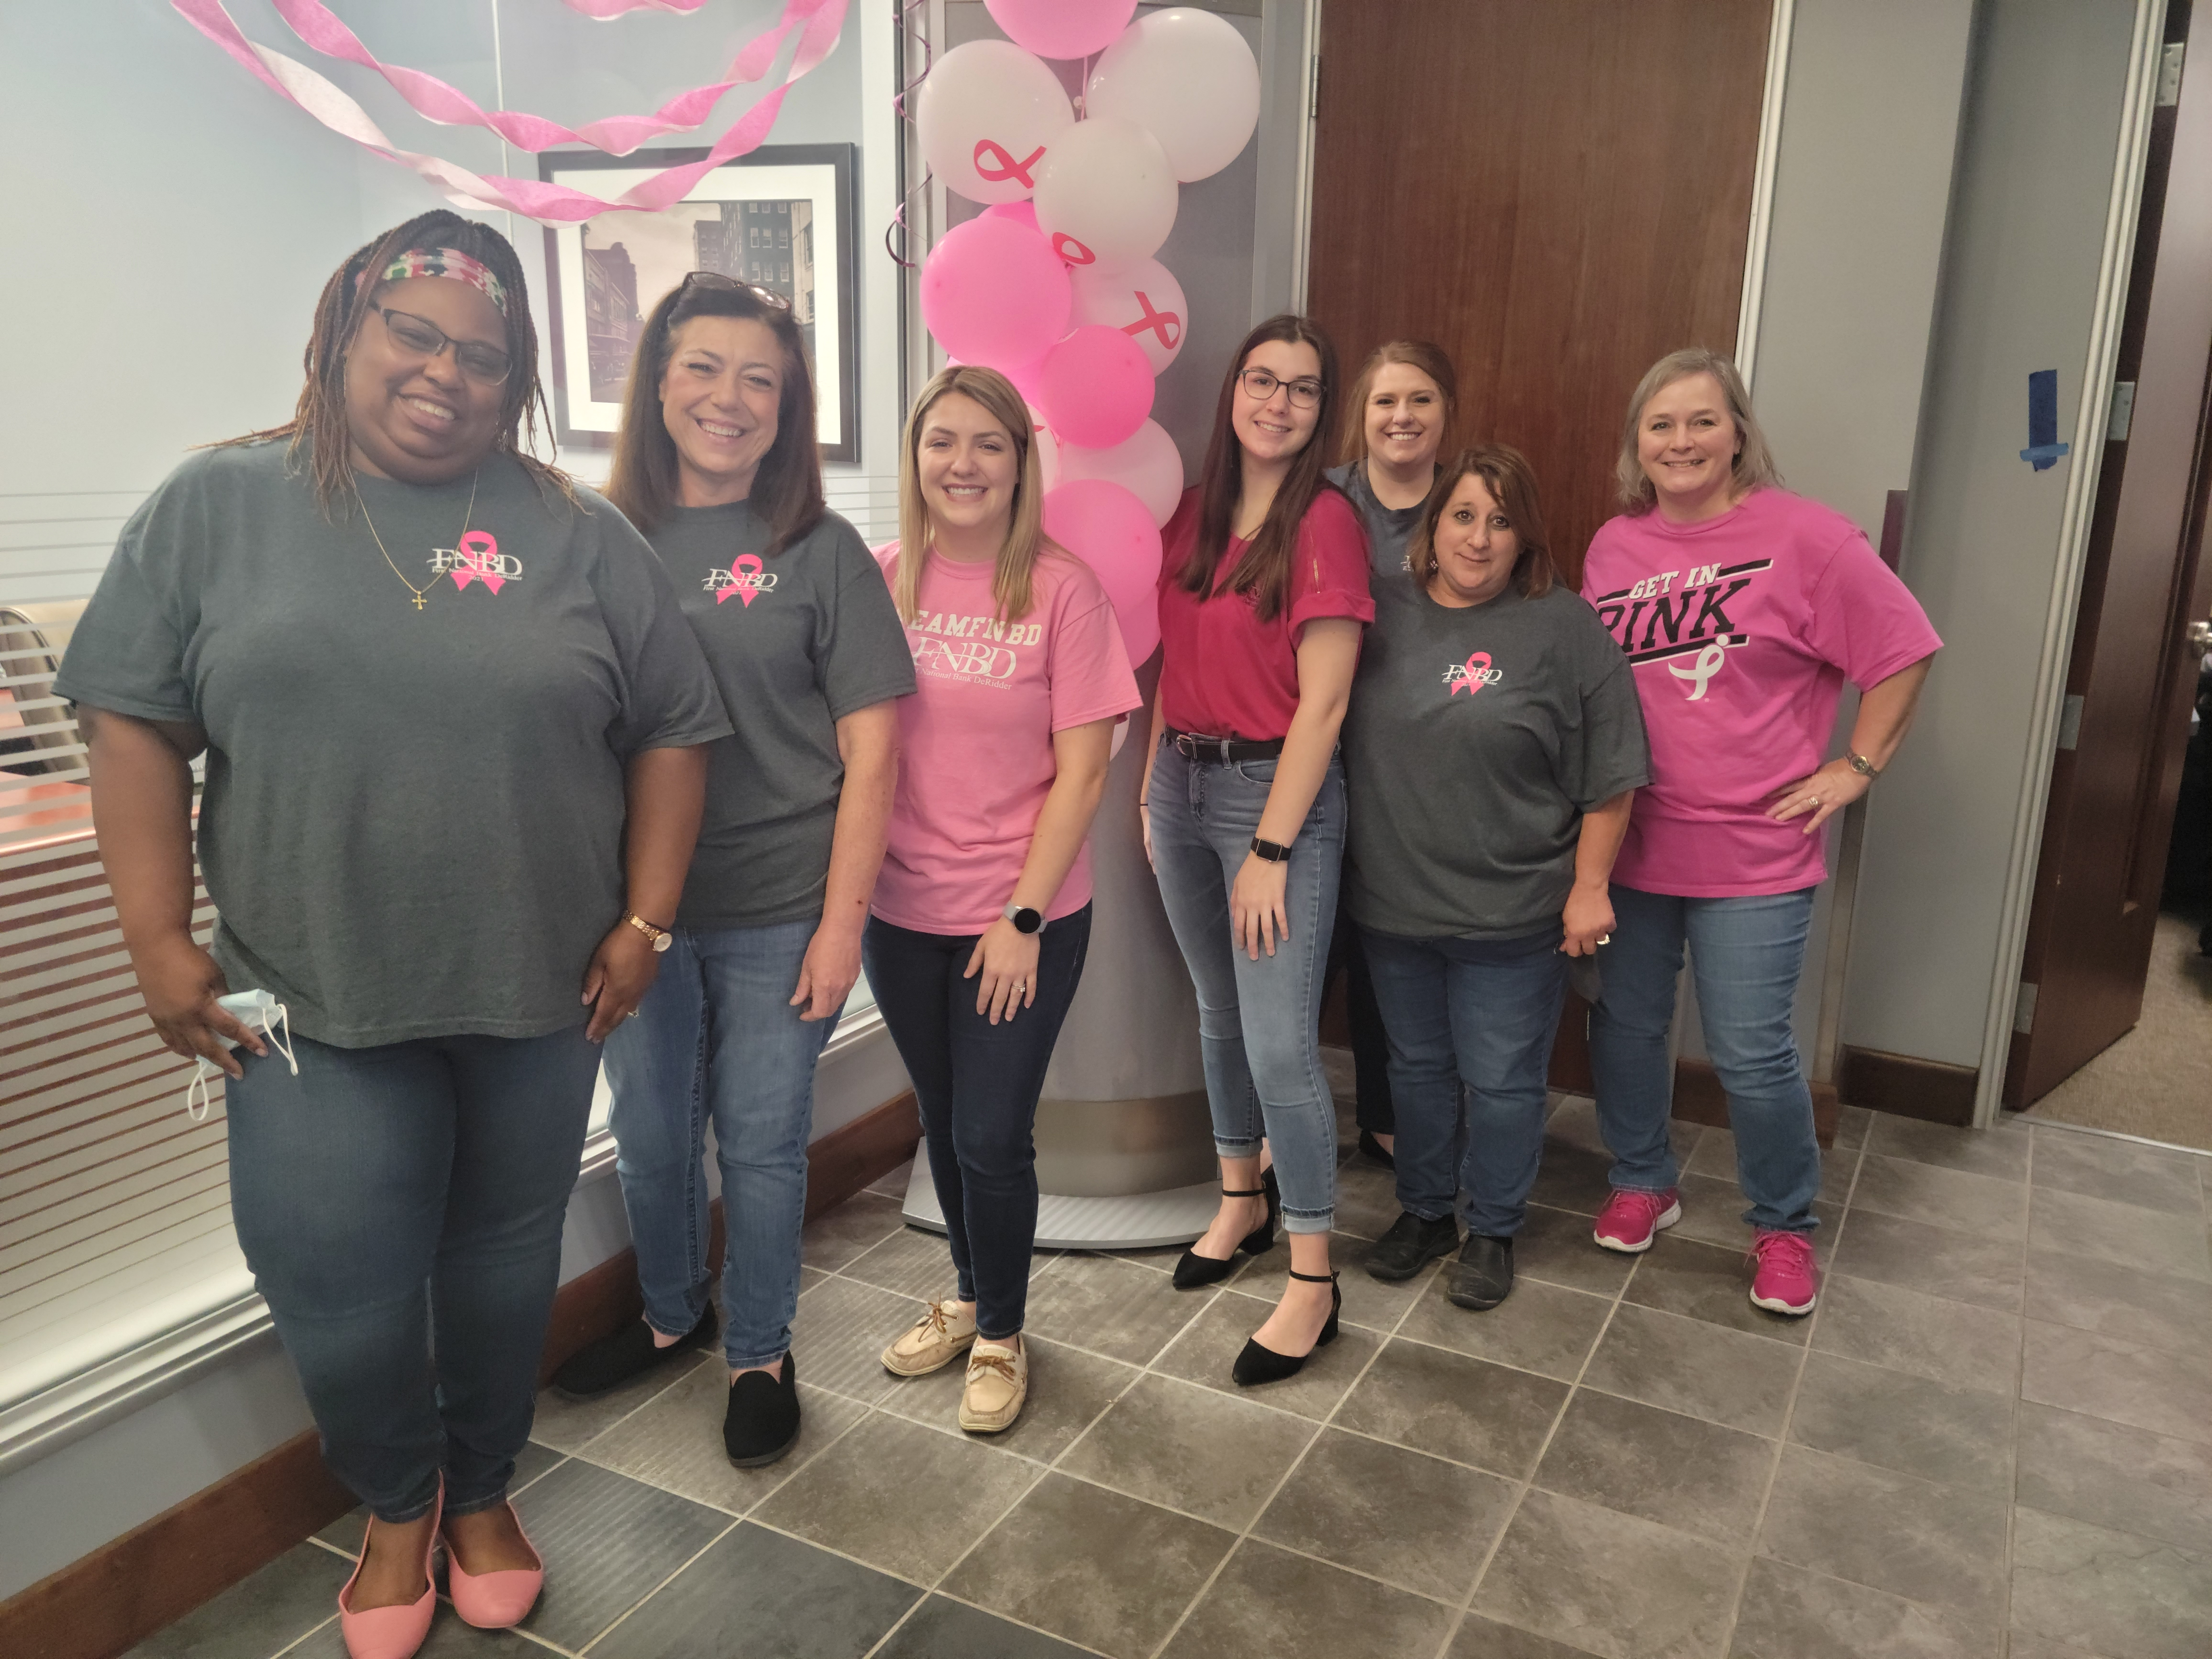 Bank FNBD "Paints The Town Pink"